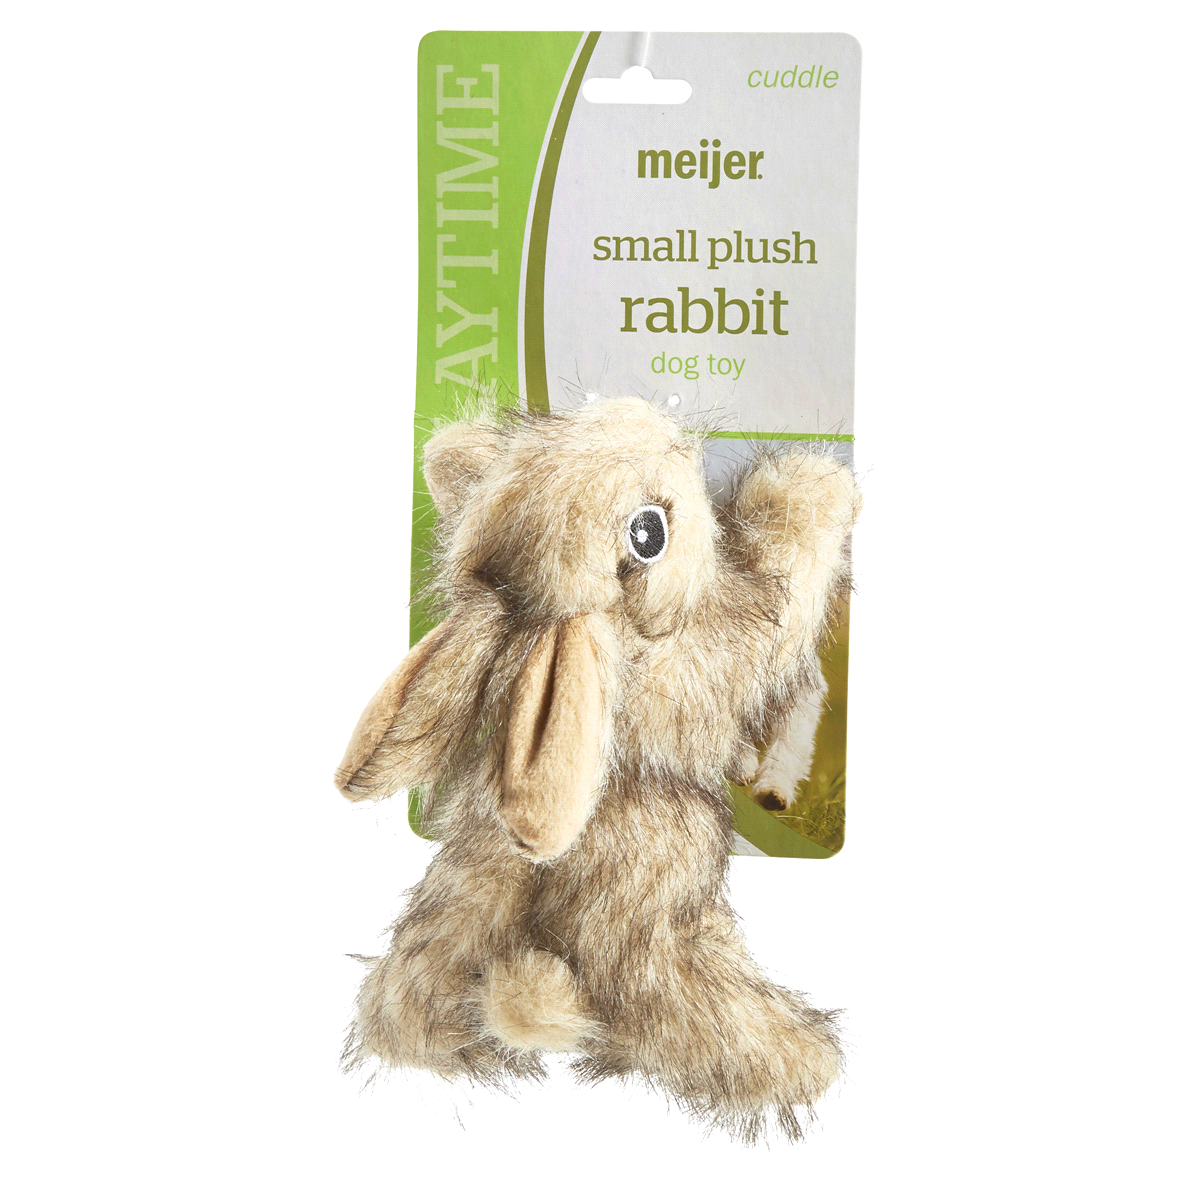 slide 5 of 29, Meijer Realistic Floppy Rabbit Plush Squeaking Dog Toy, 6.5", SMALL     